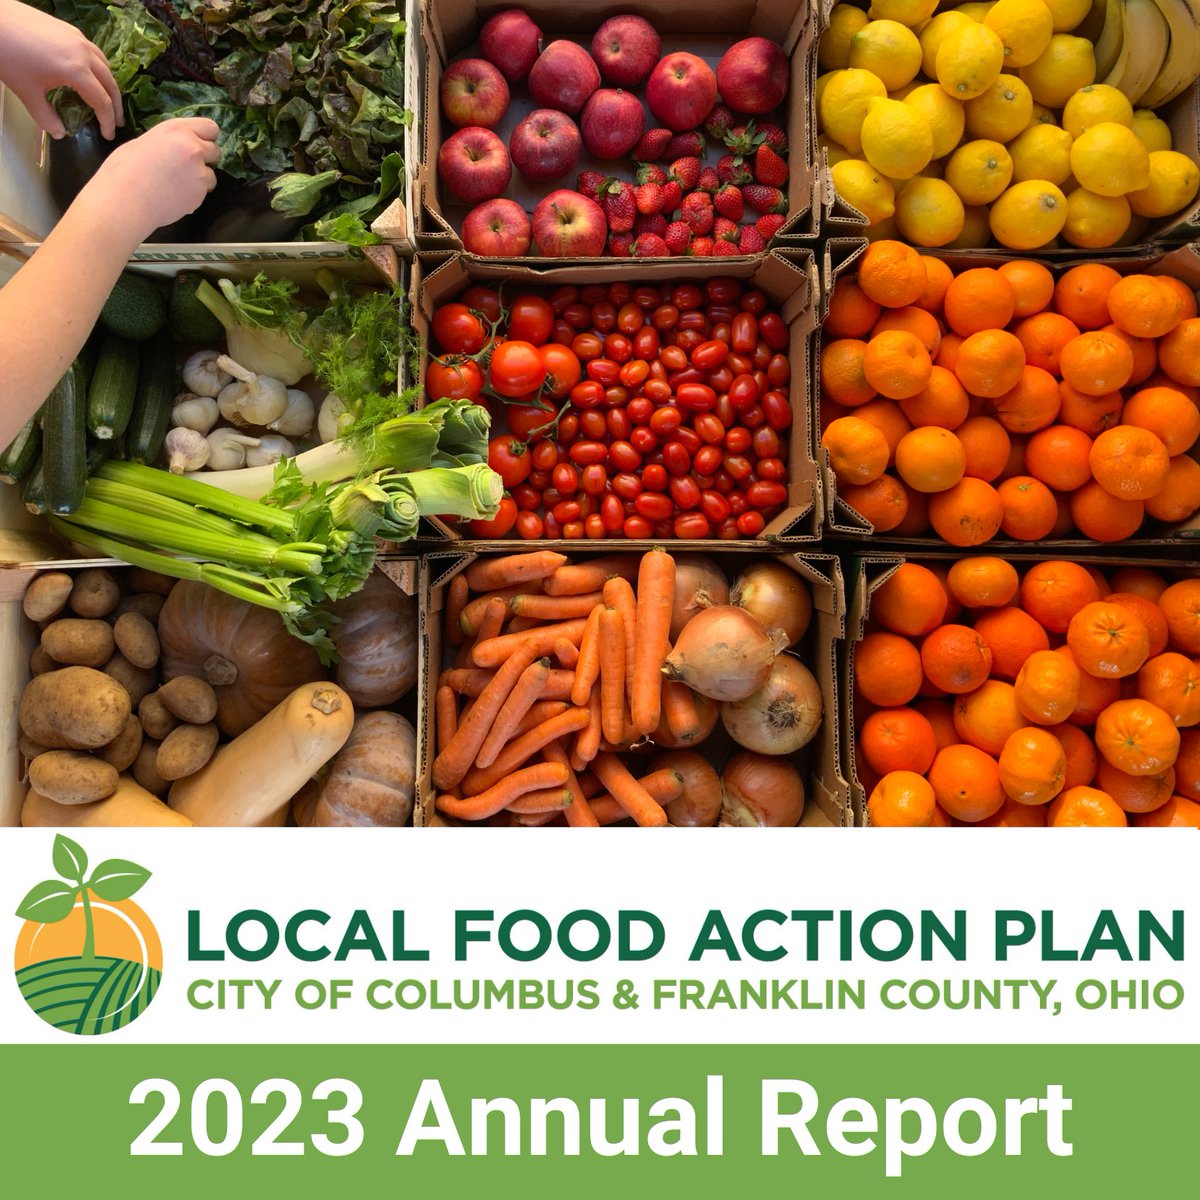 The Local Food Action Plan creates a fair and sustainable food system benefiting our economy, environment and all people. This month, the 2023 Local Food Action Plan Annual Report was adopted. Check out a new interactive StoryMap at storymaps.arcgis.com/stories/d55506….